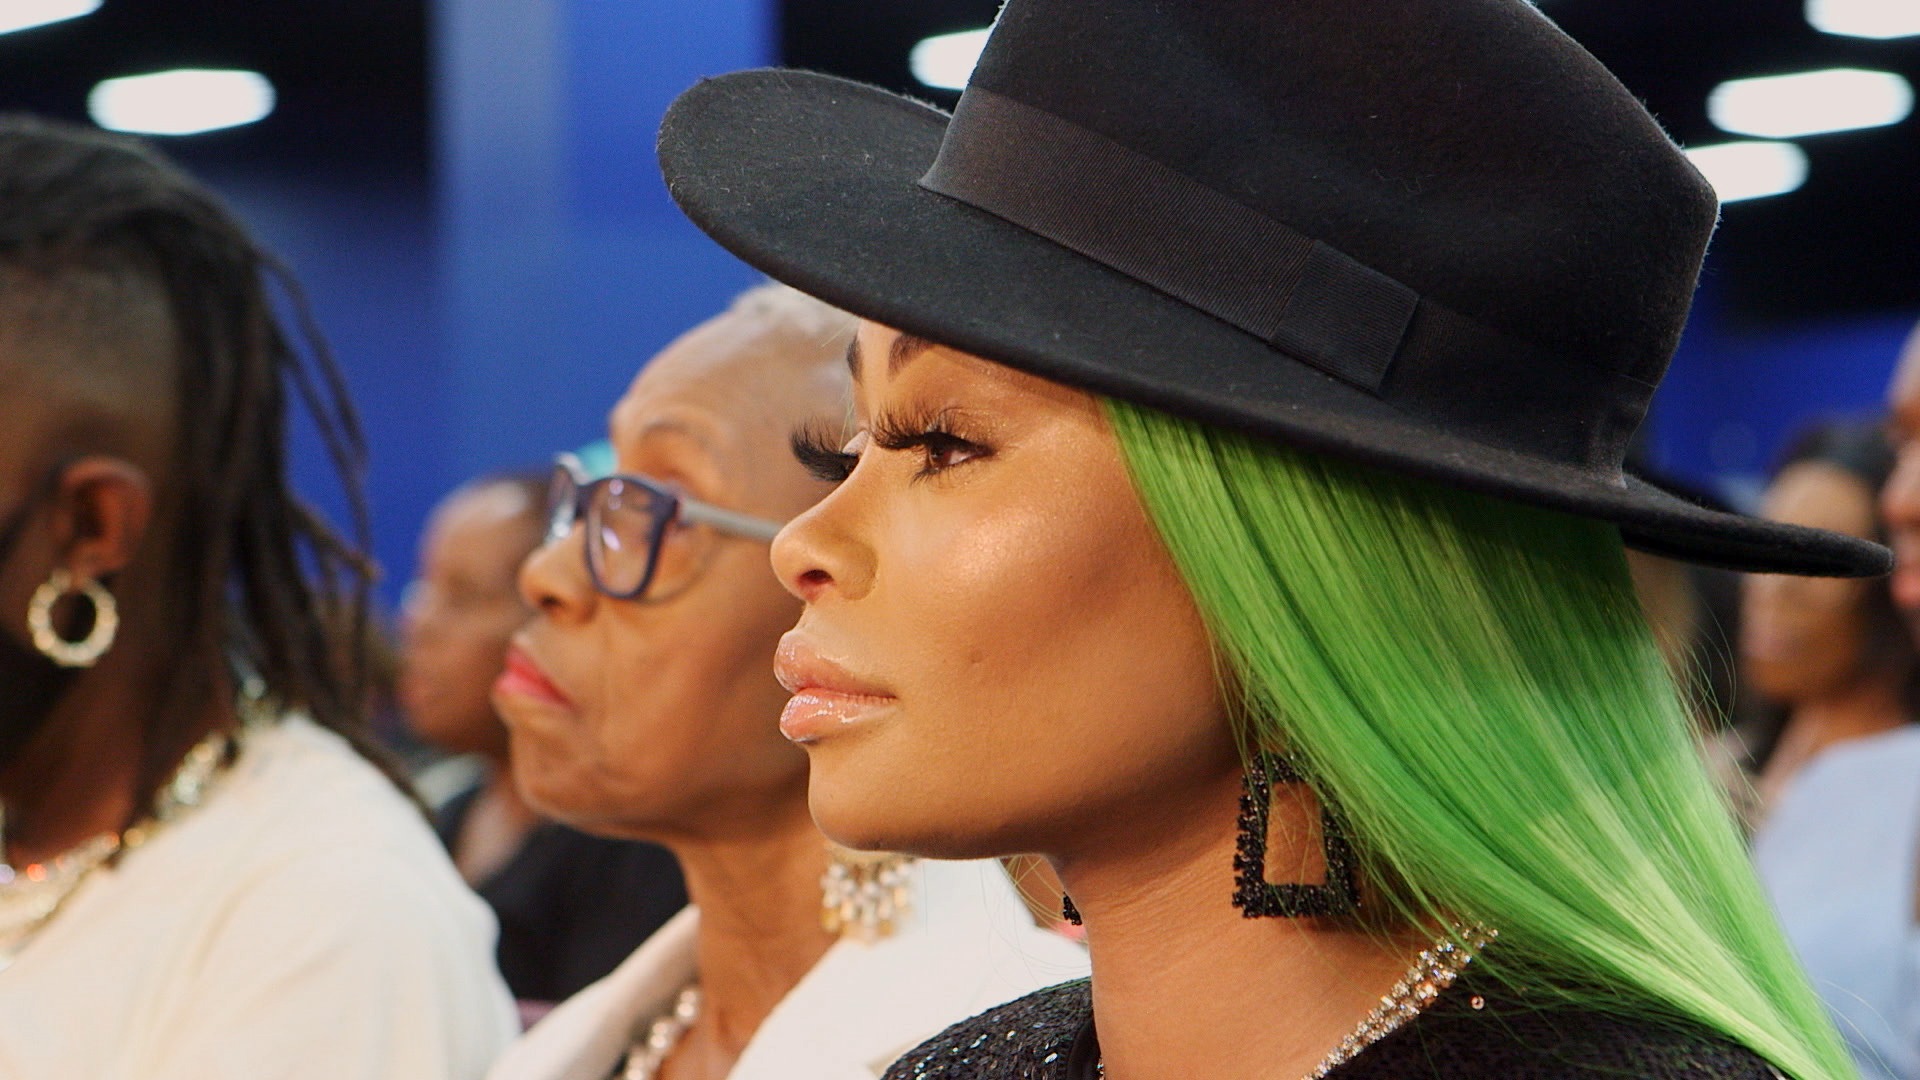 The Real Blac Chyna Season 1 Episode 11 - You Shouldn't Text In Church